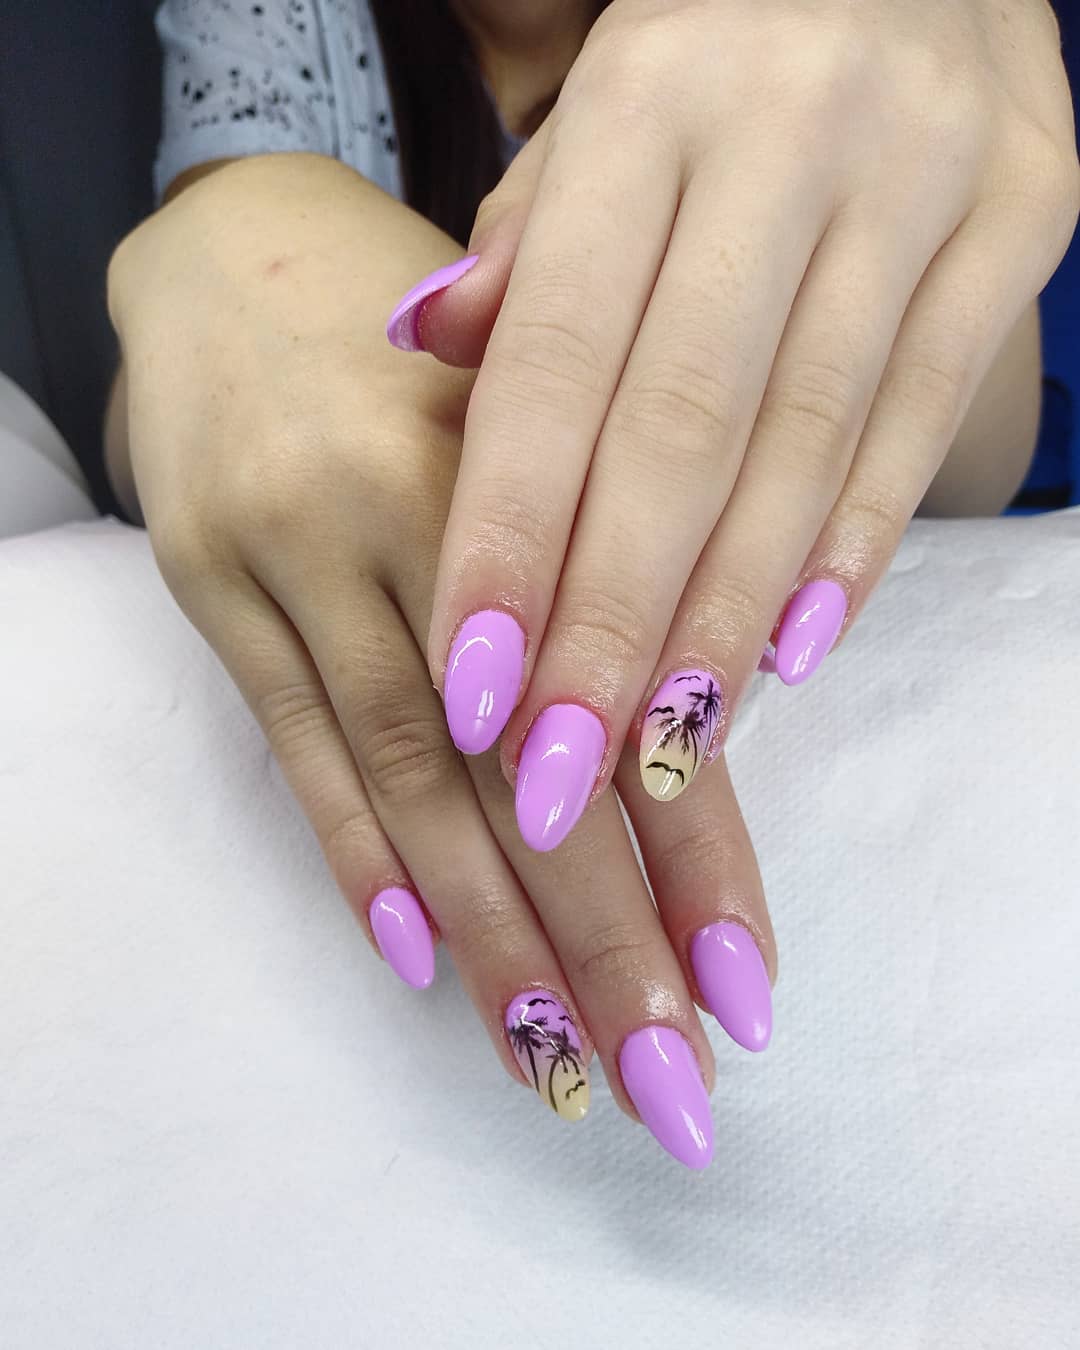 Will be best for your Summer holiday. Pic by gosia_nails_photo